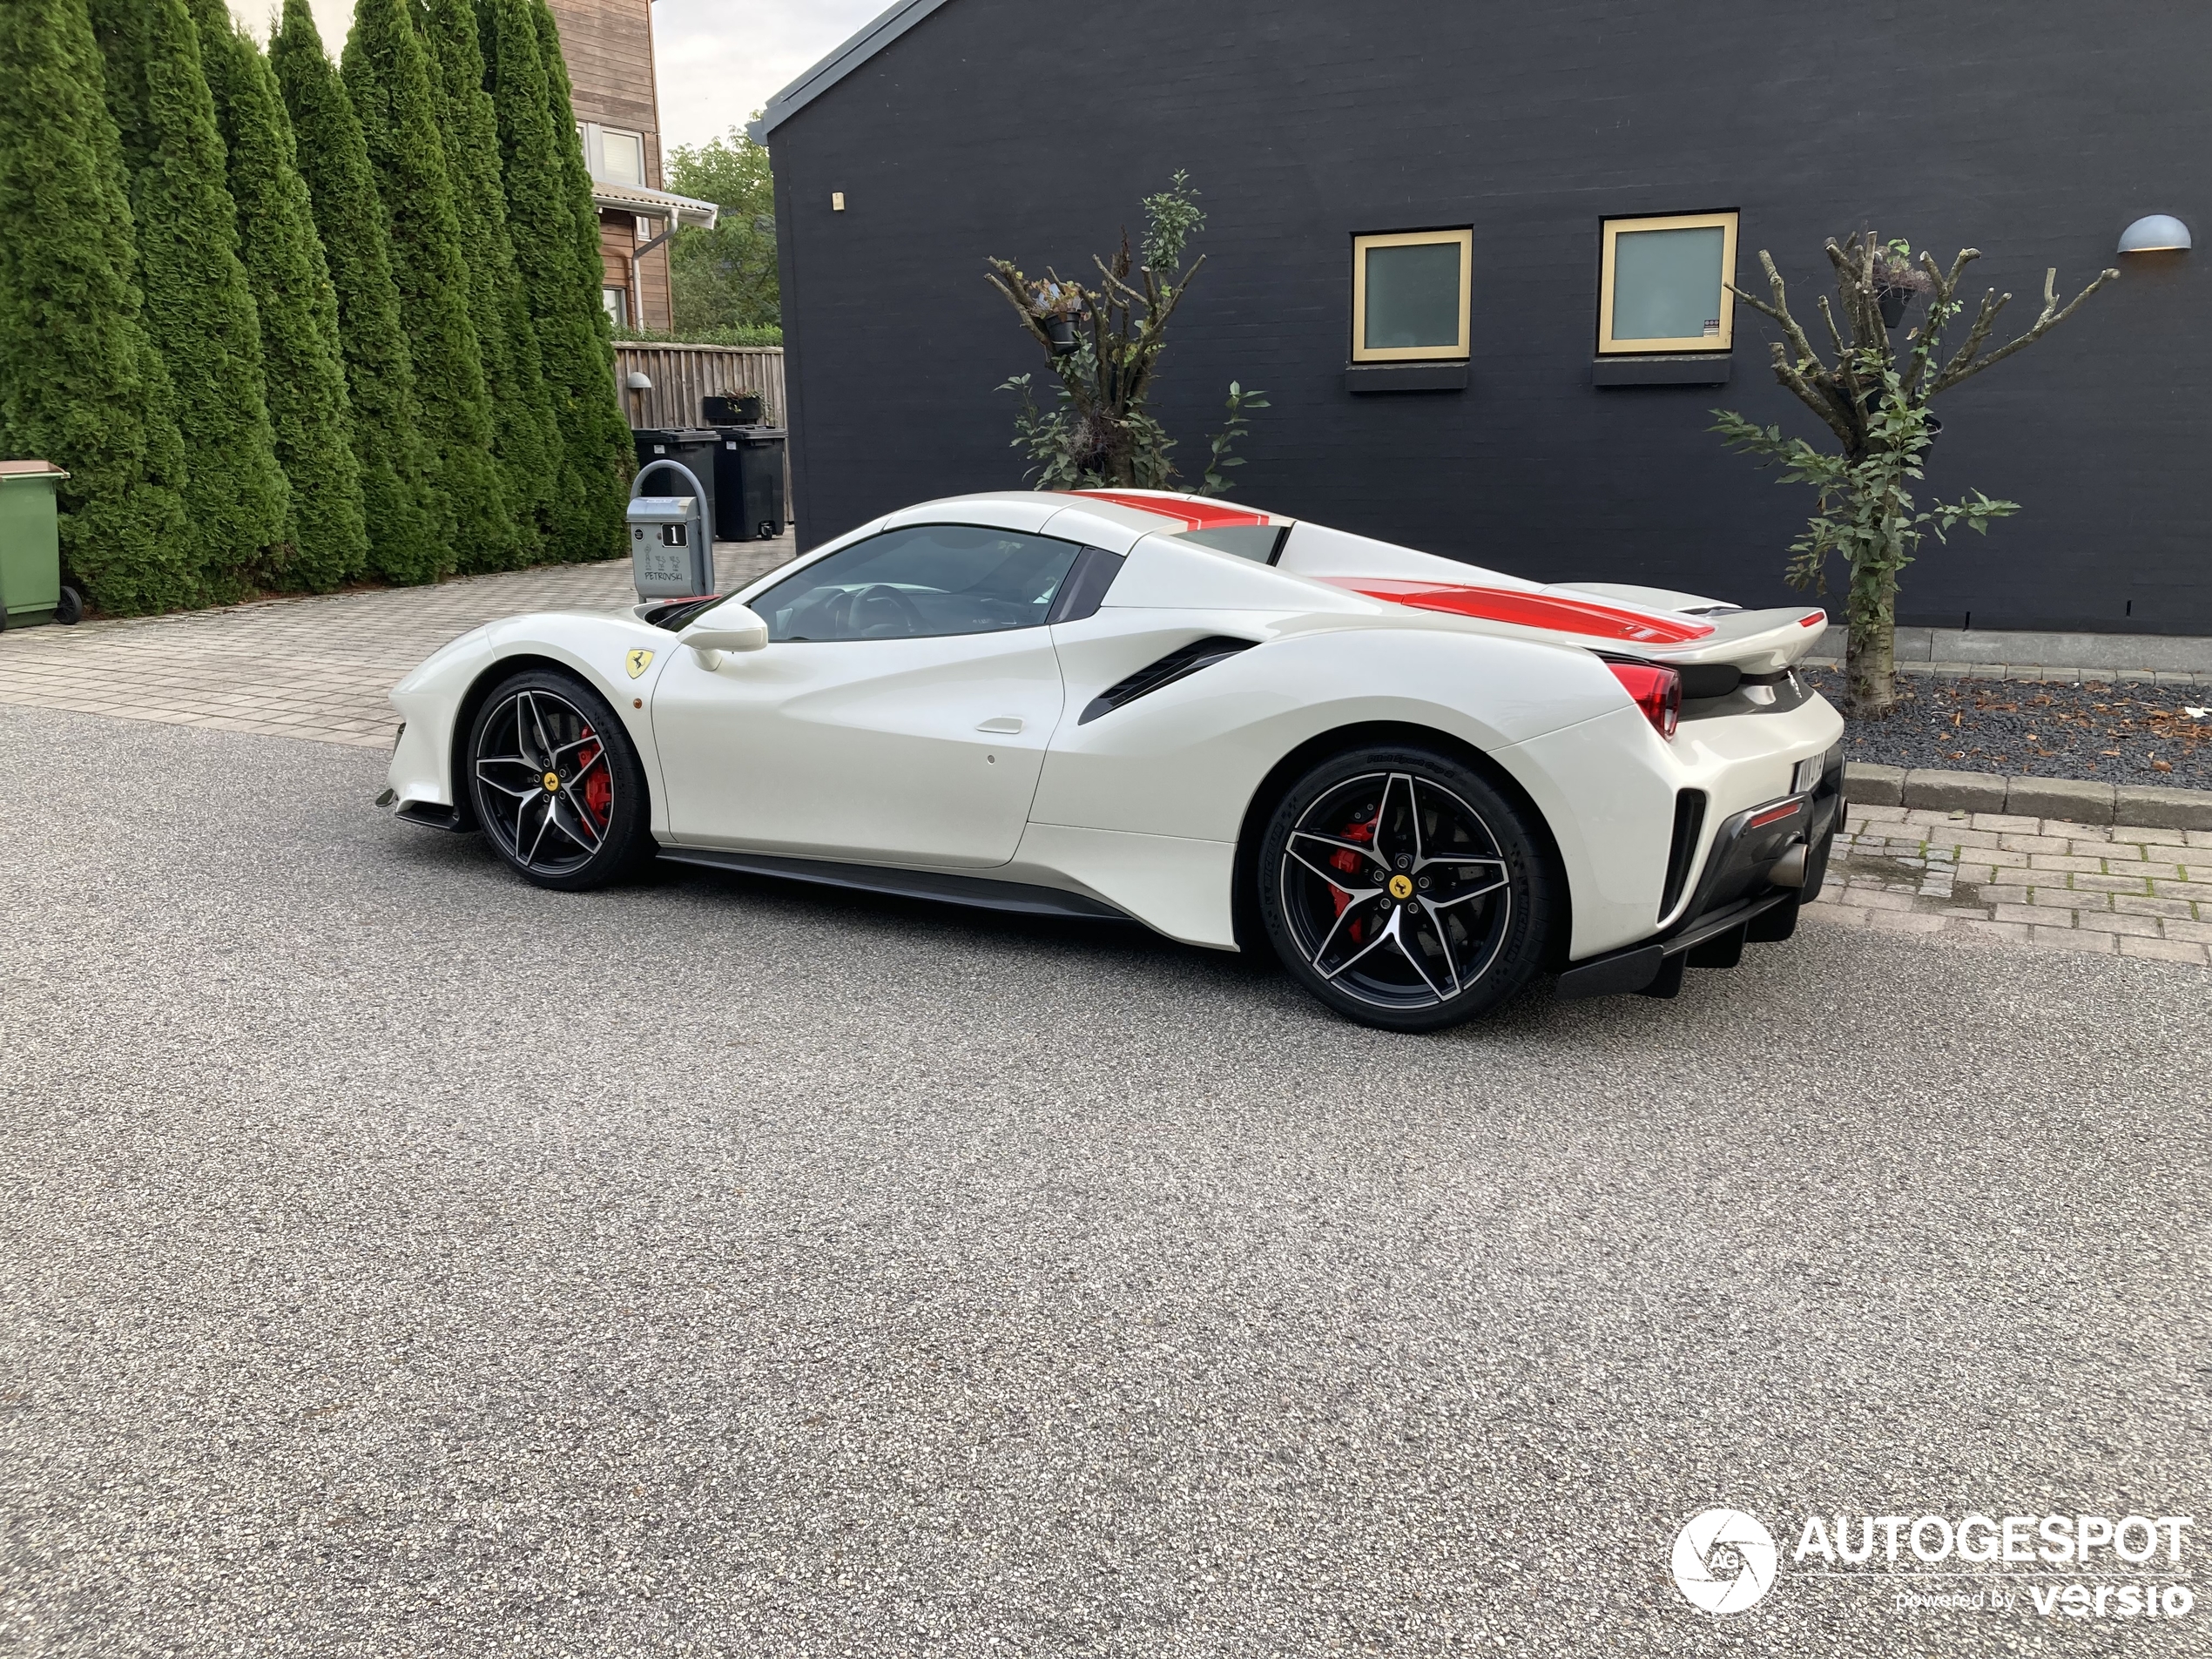 A beautiful 488 Pista Spider shows up in Malmö, Sweden